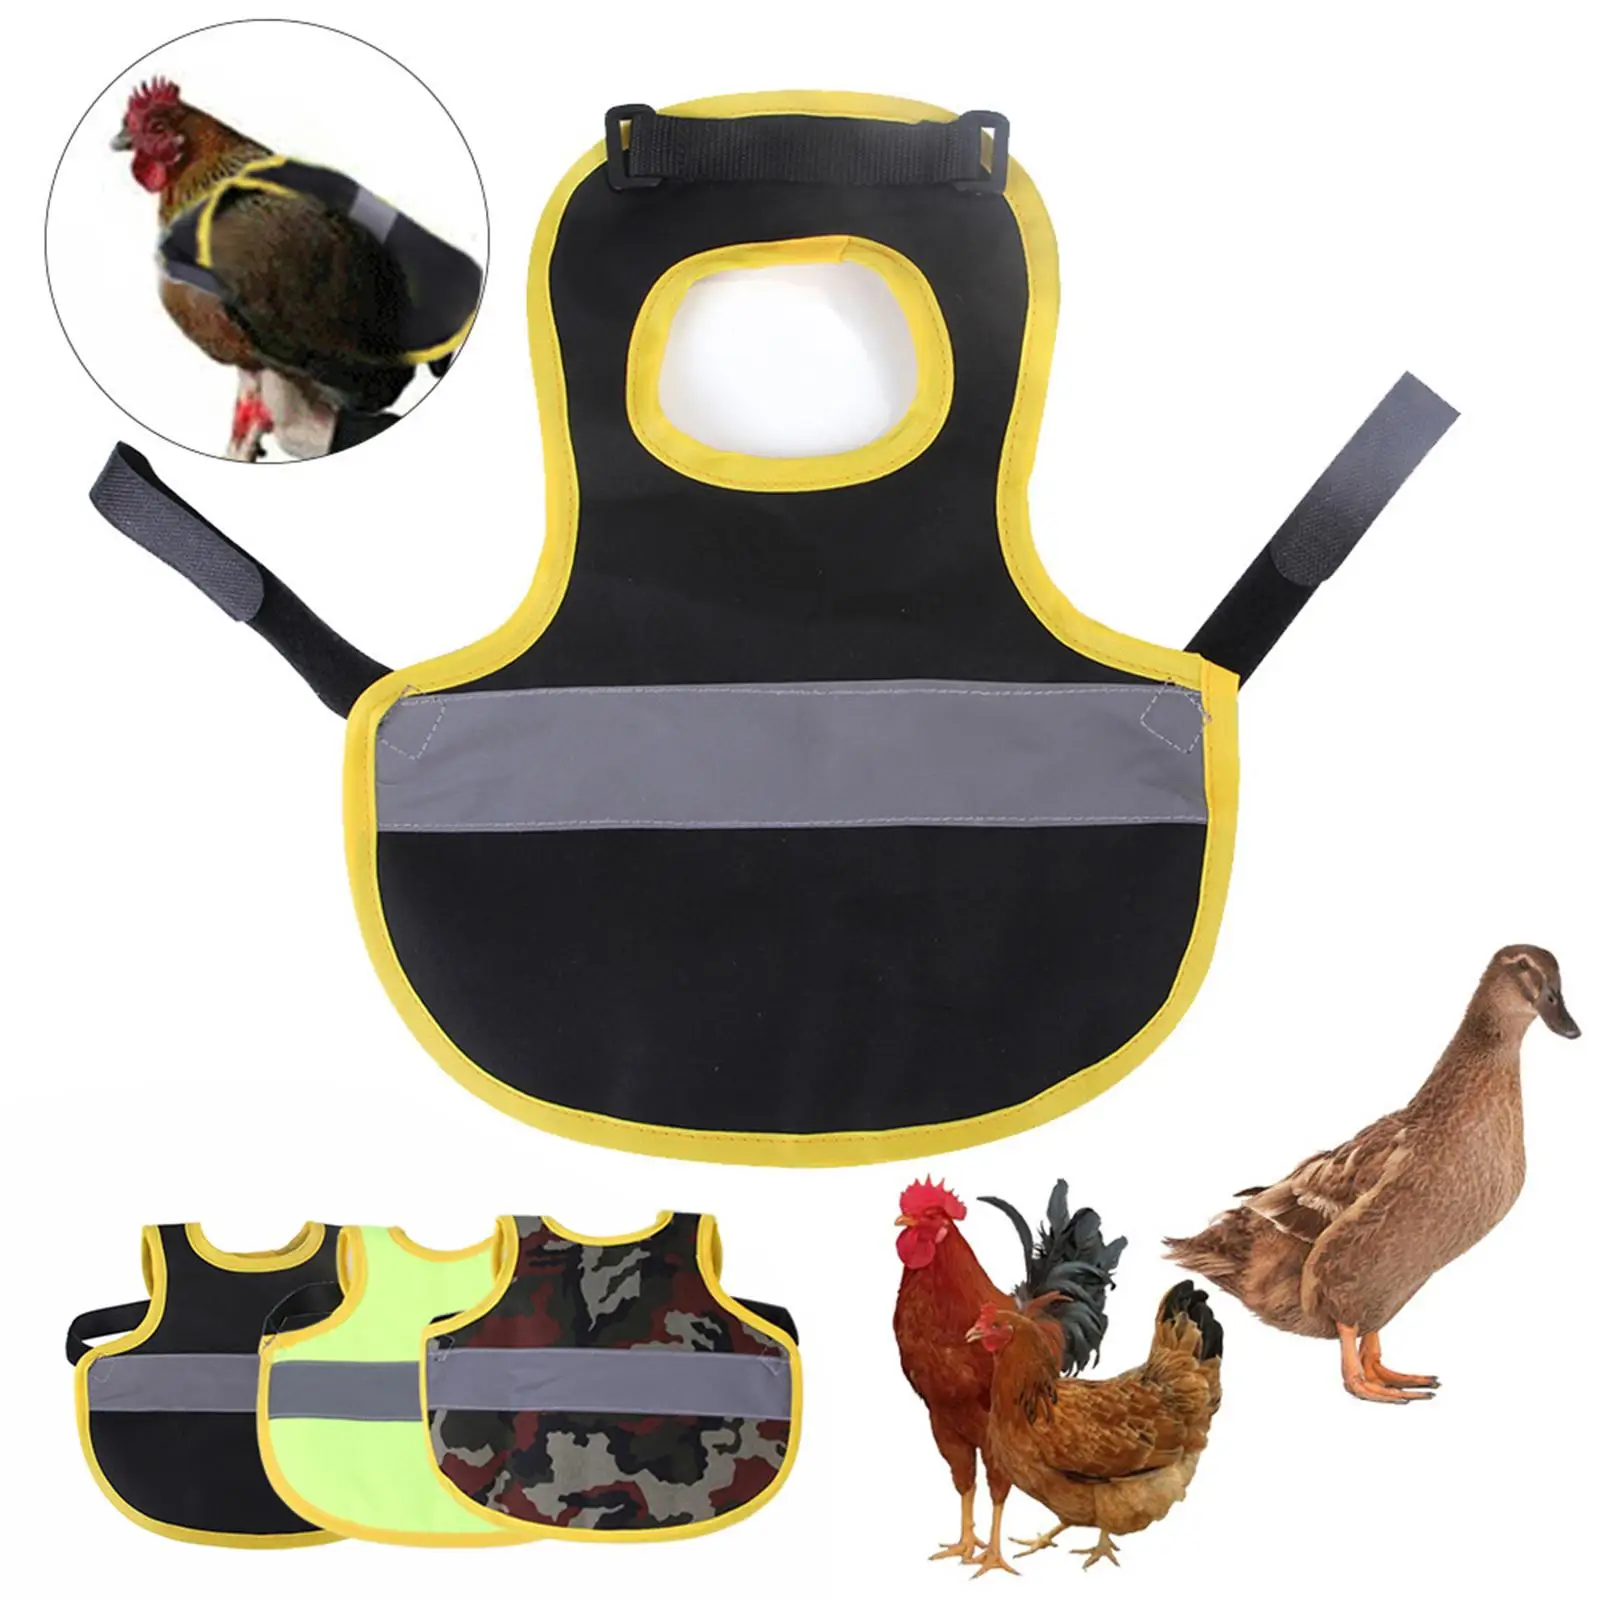 Chicken Saddle Hen Apron Protect Back , wing Feather Protection Standard Size Jacket Suit Small Medium and Large Hens